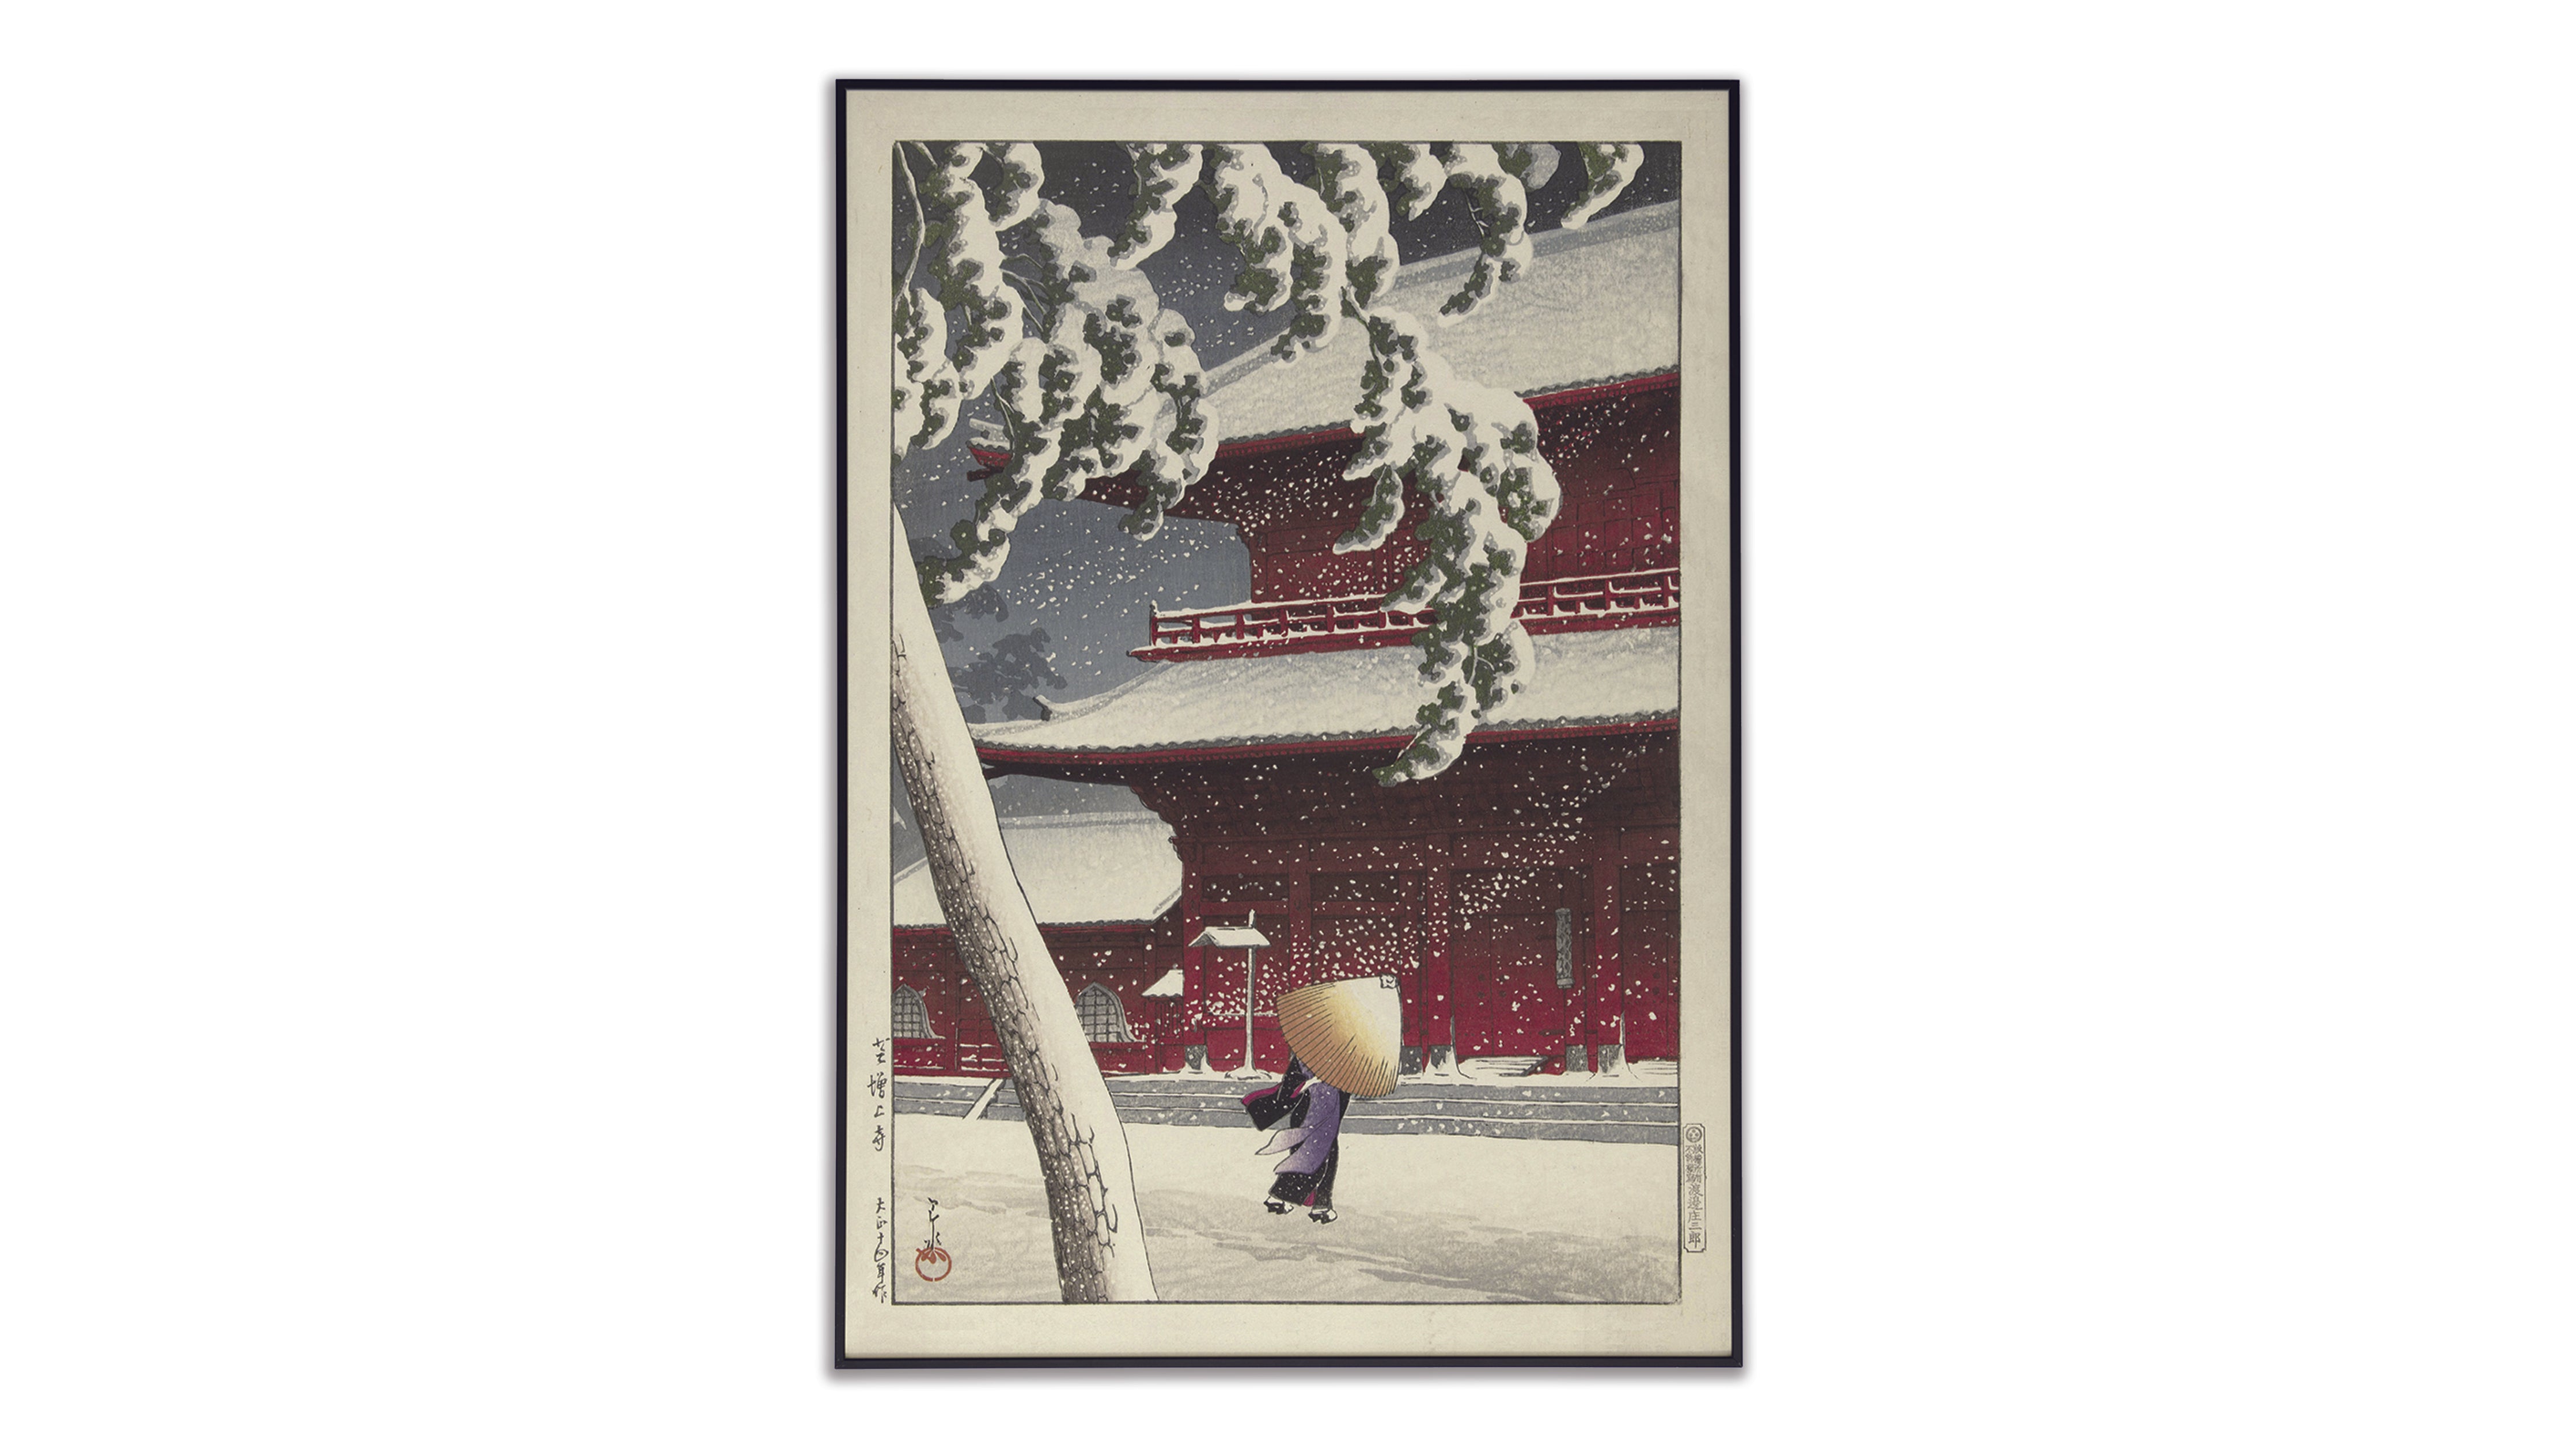 The Zojoji Temple by Hasui Kawase - Giant Poster - The Mousepad Company